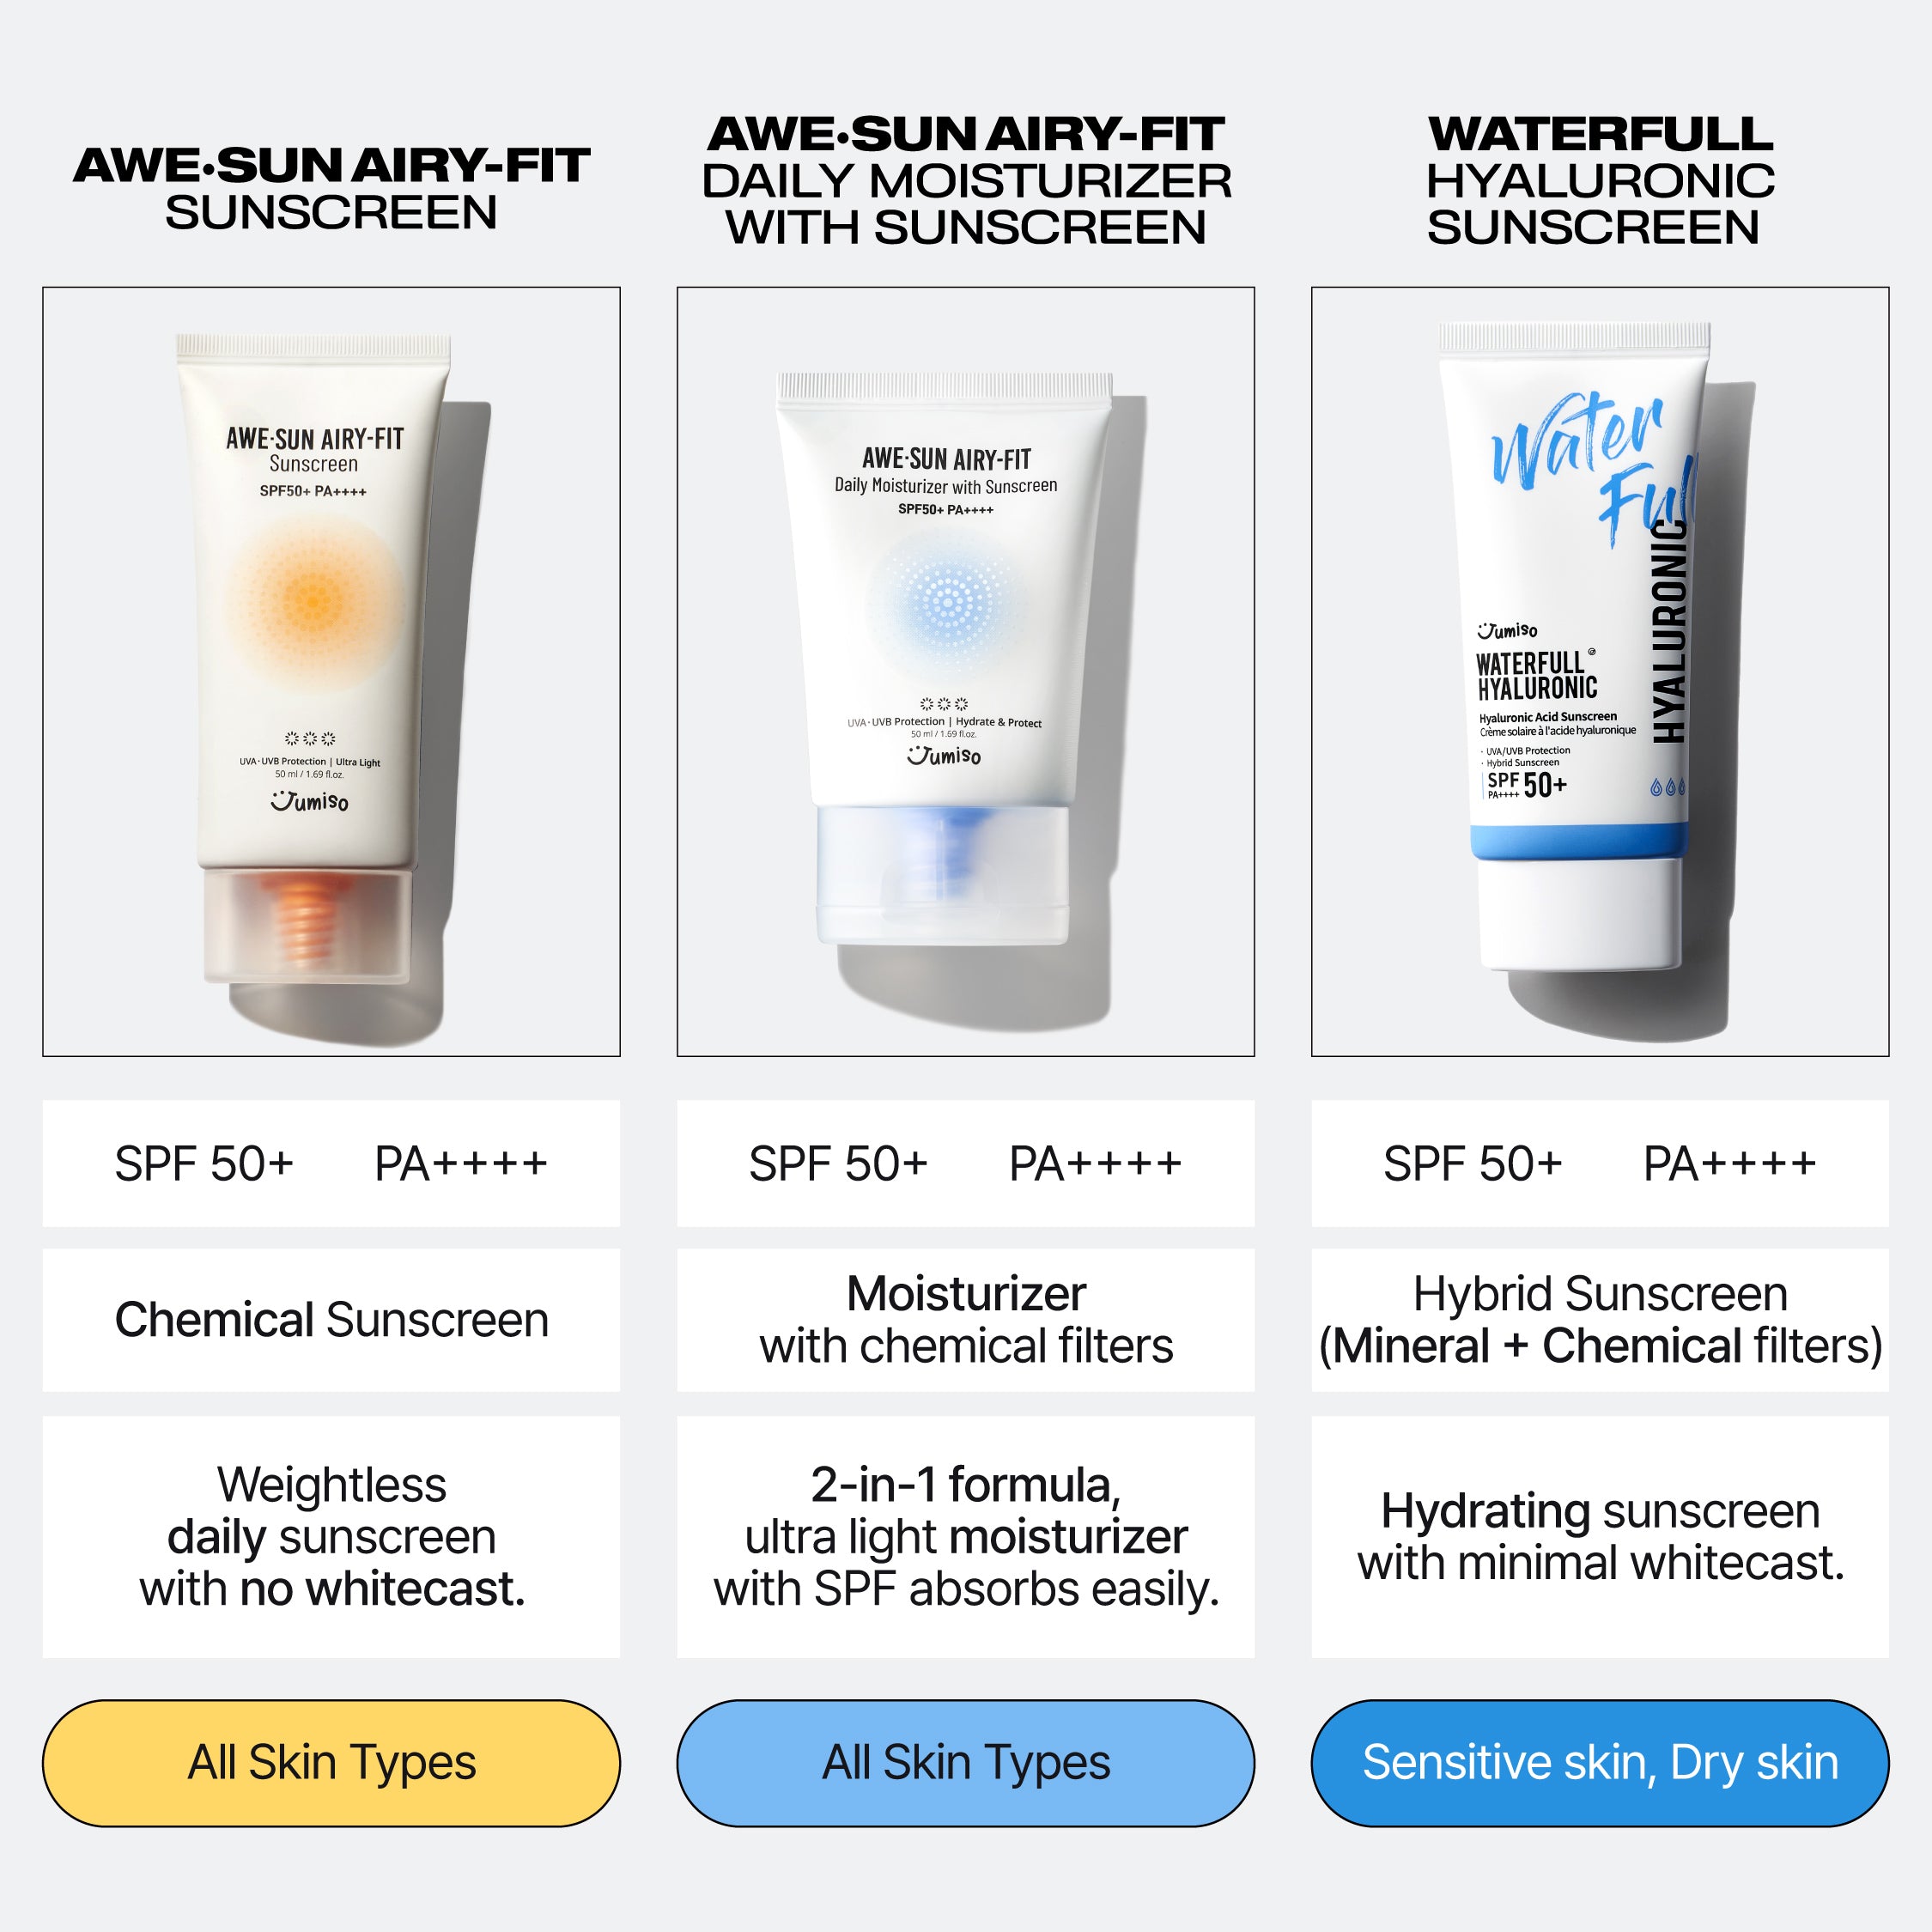 AWE⋅SUN AIRY-FIT Daily Moisturizer with Sunscreen SPF50+ PA++++ 50ml